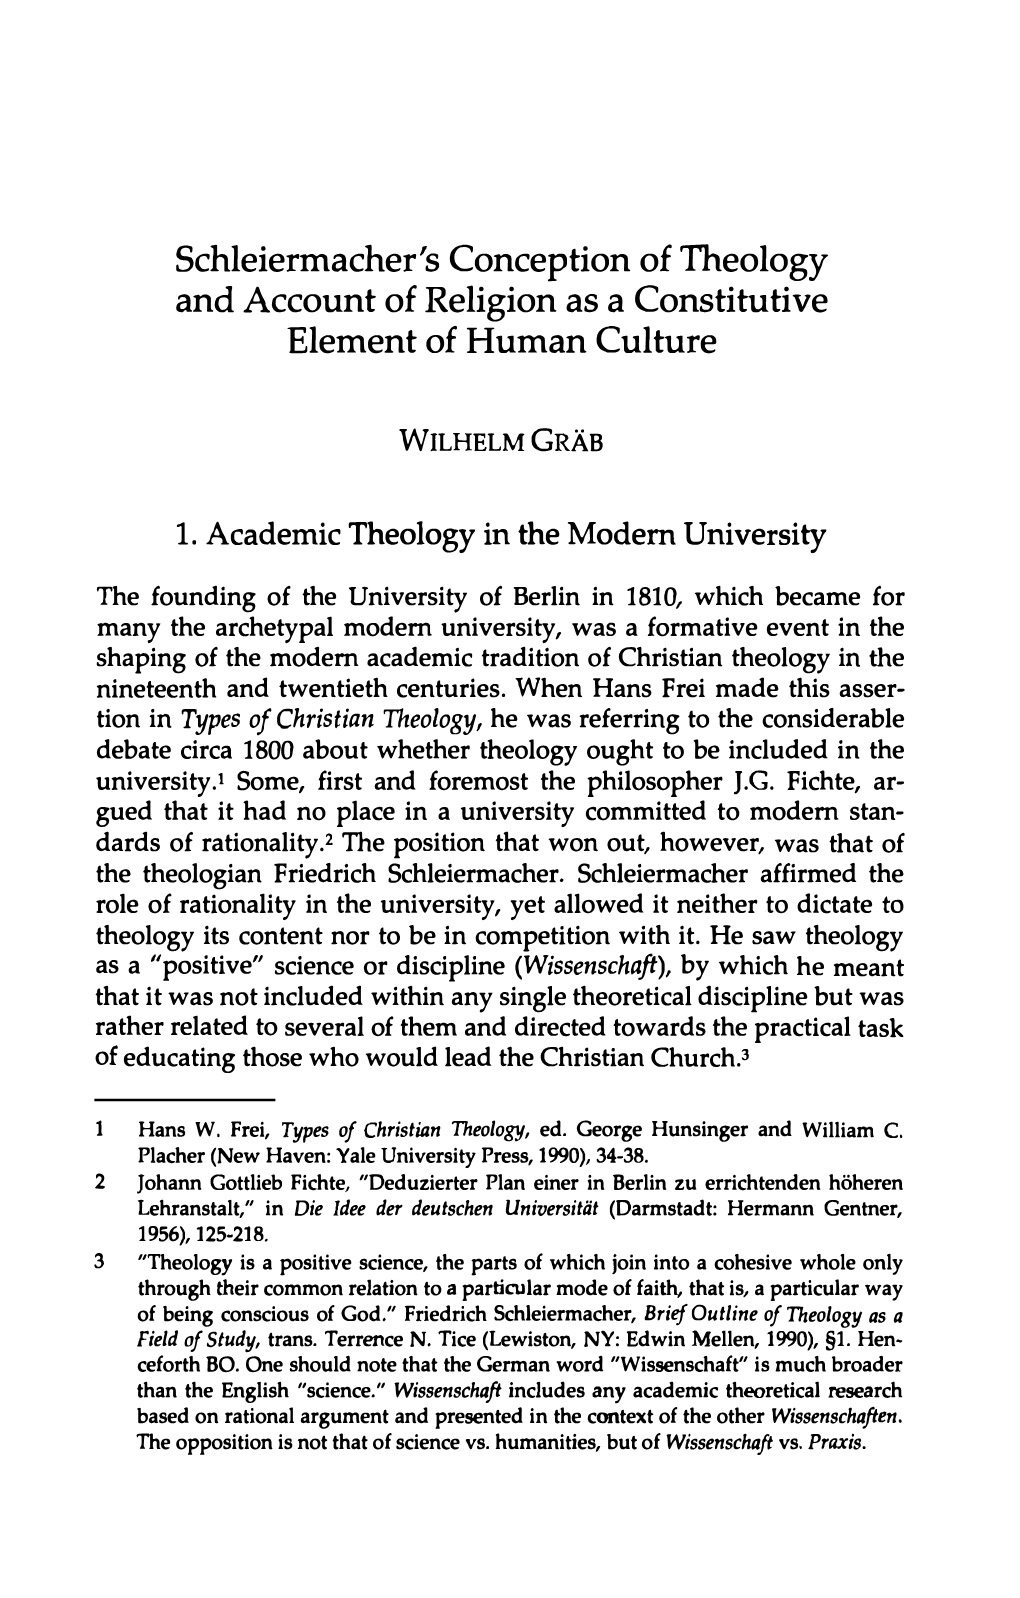 Schleiermacher's Conception of Theology and Account of Religion 337